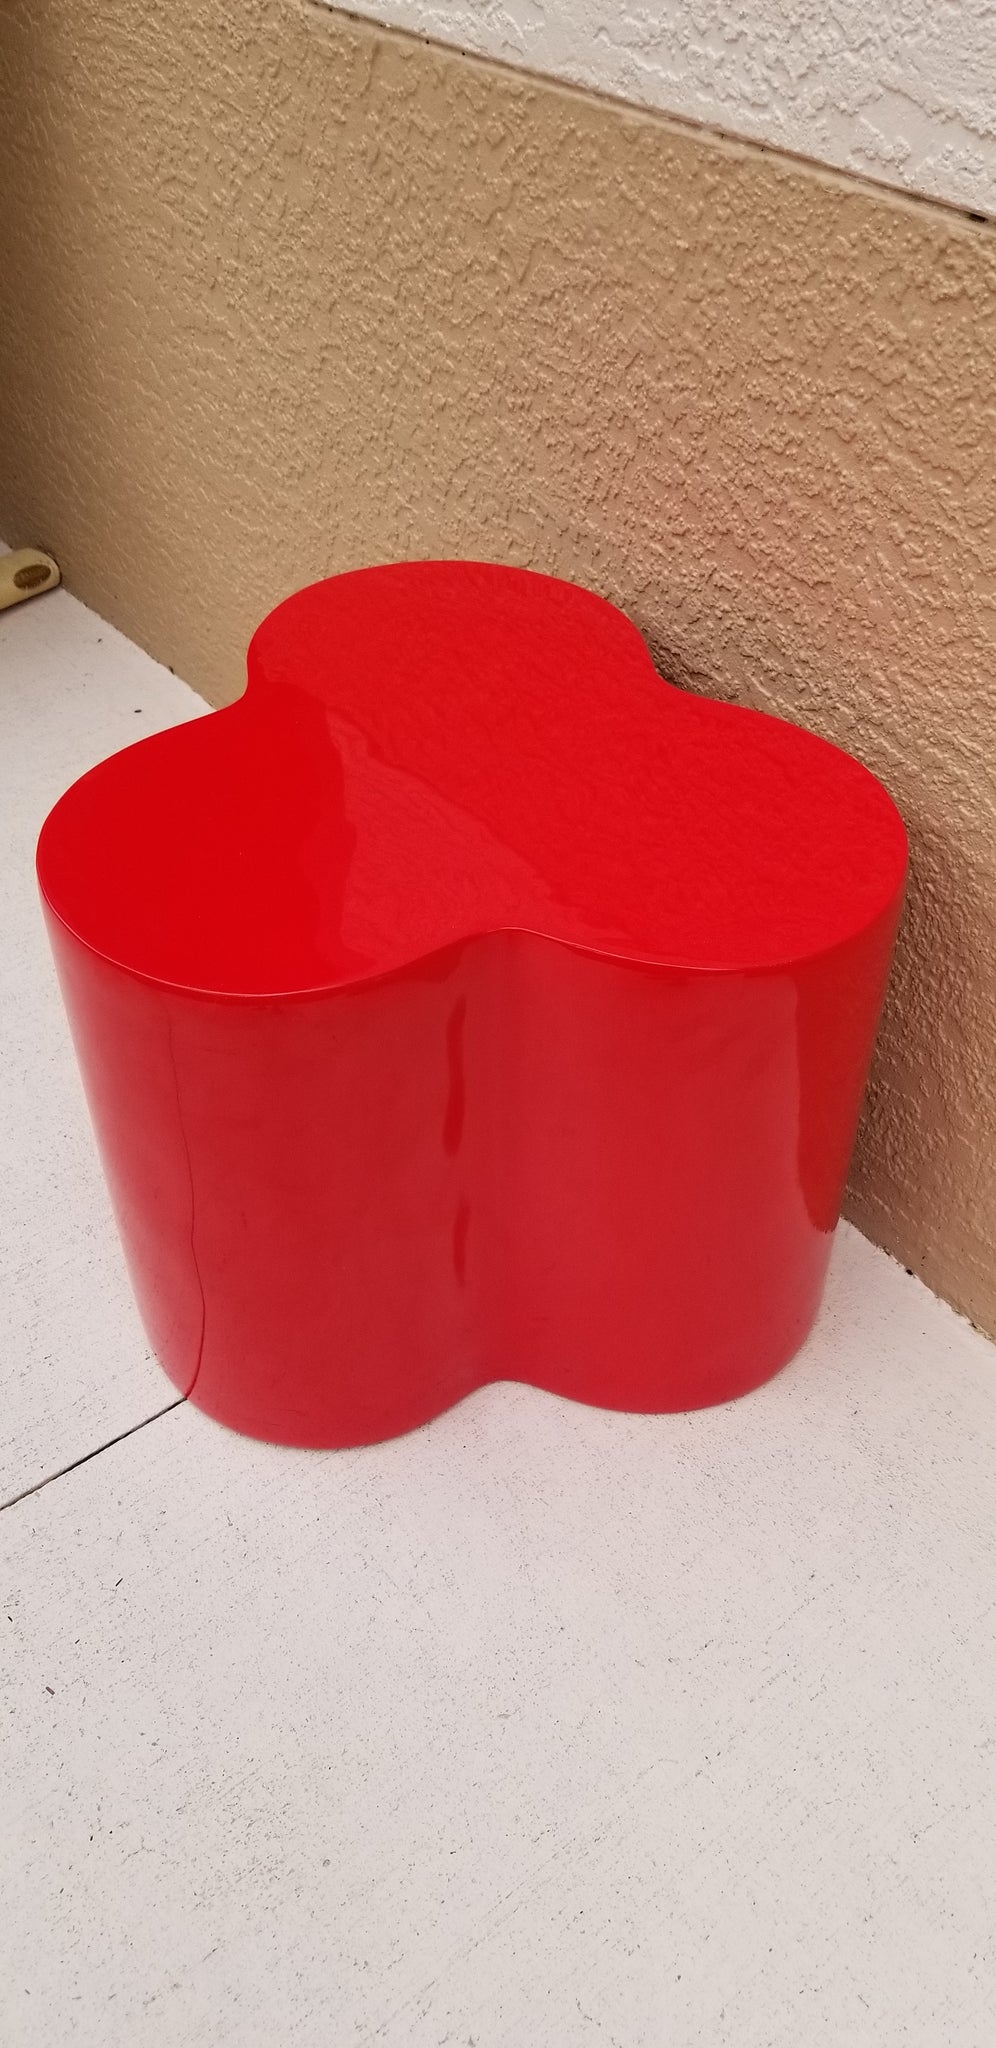 VINTAGE MID CENTURY MODERN RED❣️ FIBERGLASS CLOVER ACCENT/ END TABLE